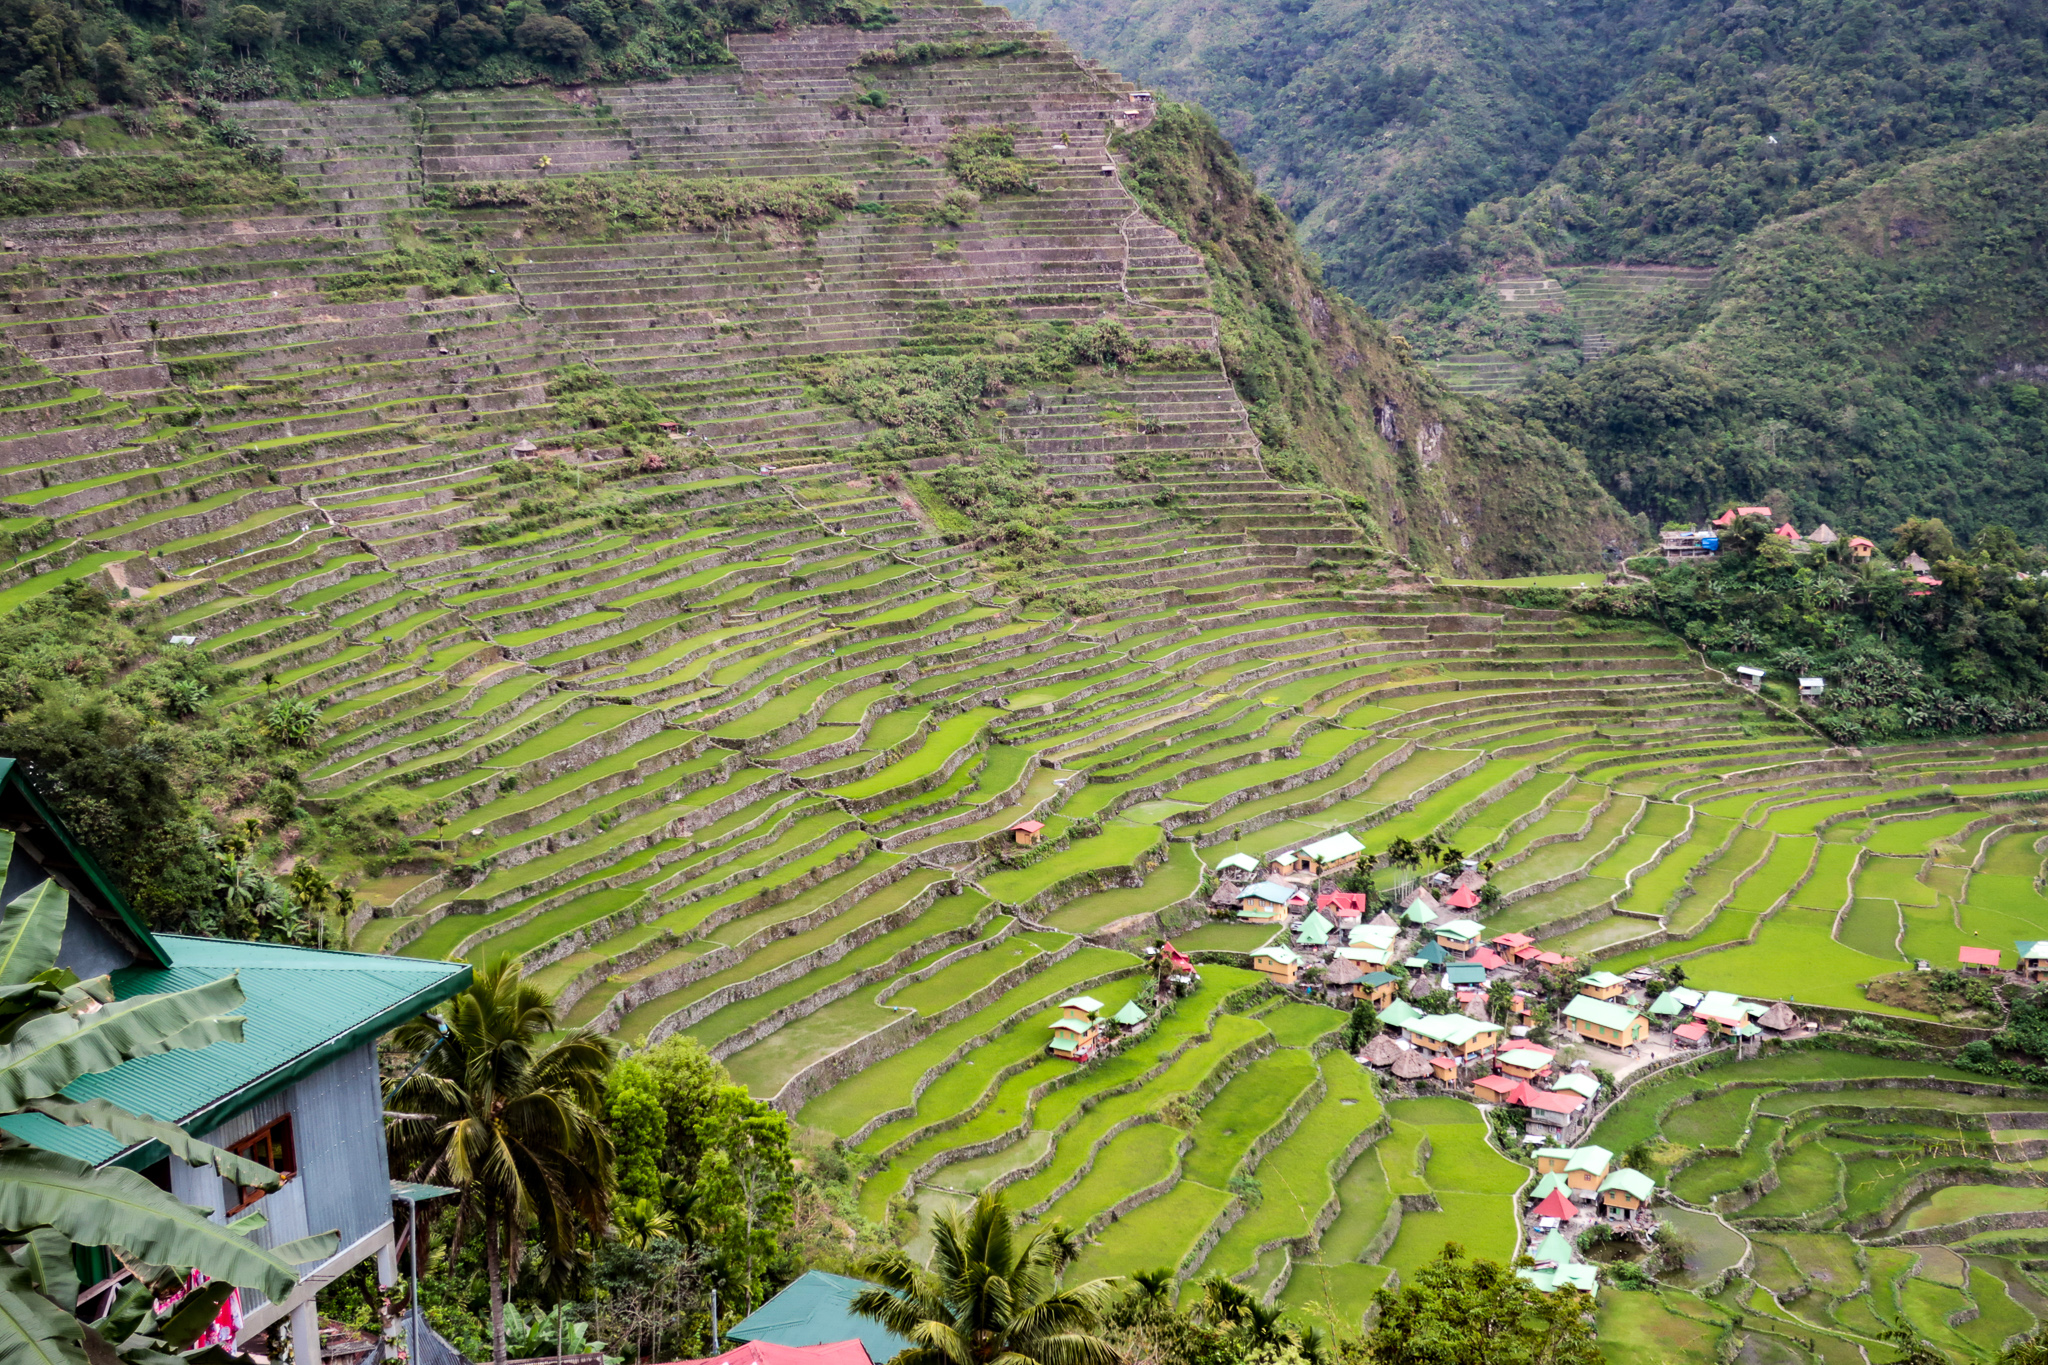 Breathtaking Rice Terraces of Ifugao Province, Philippines - There Is Cory